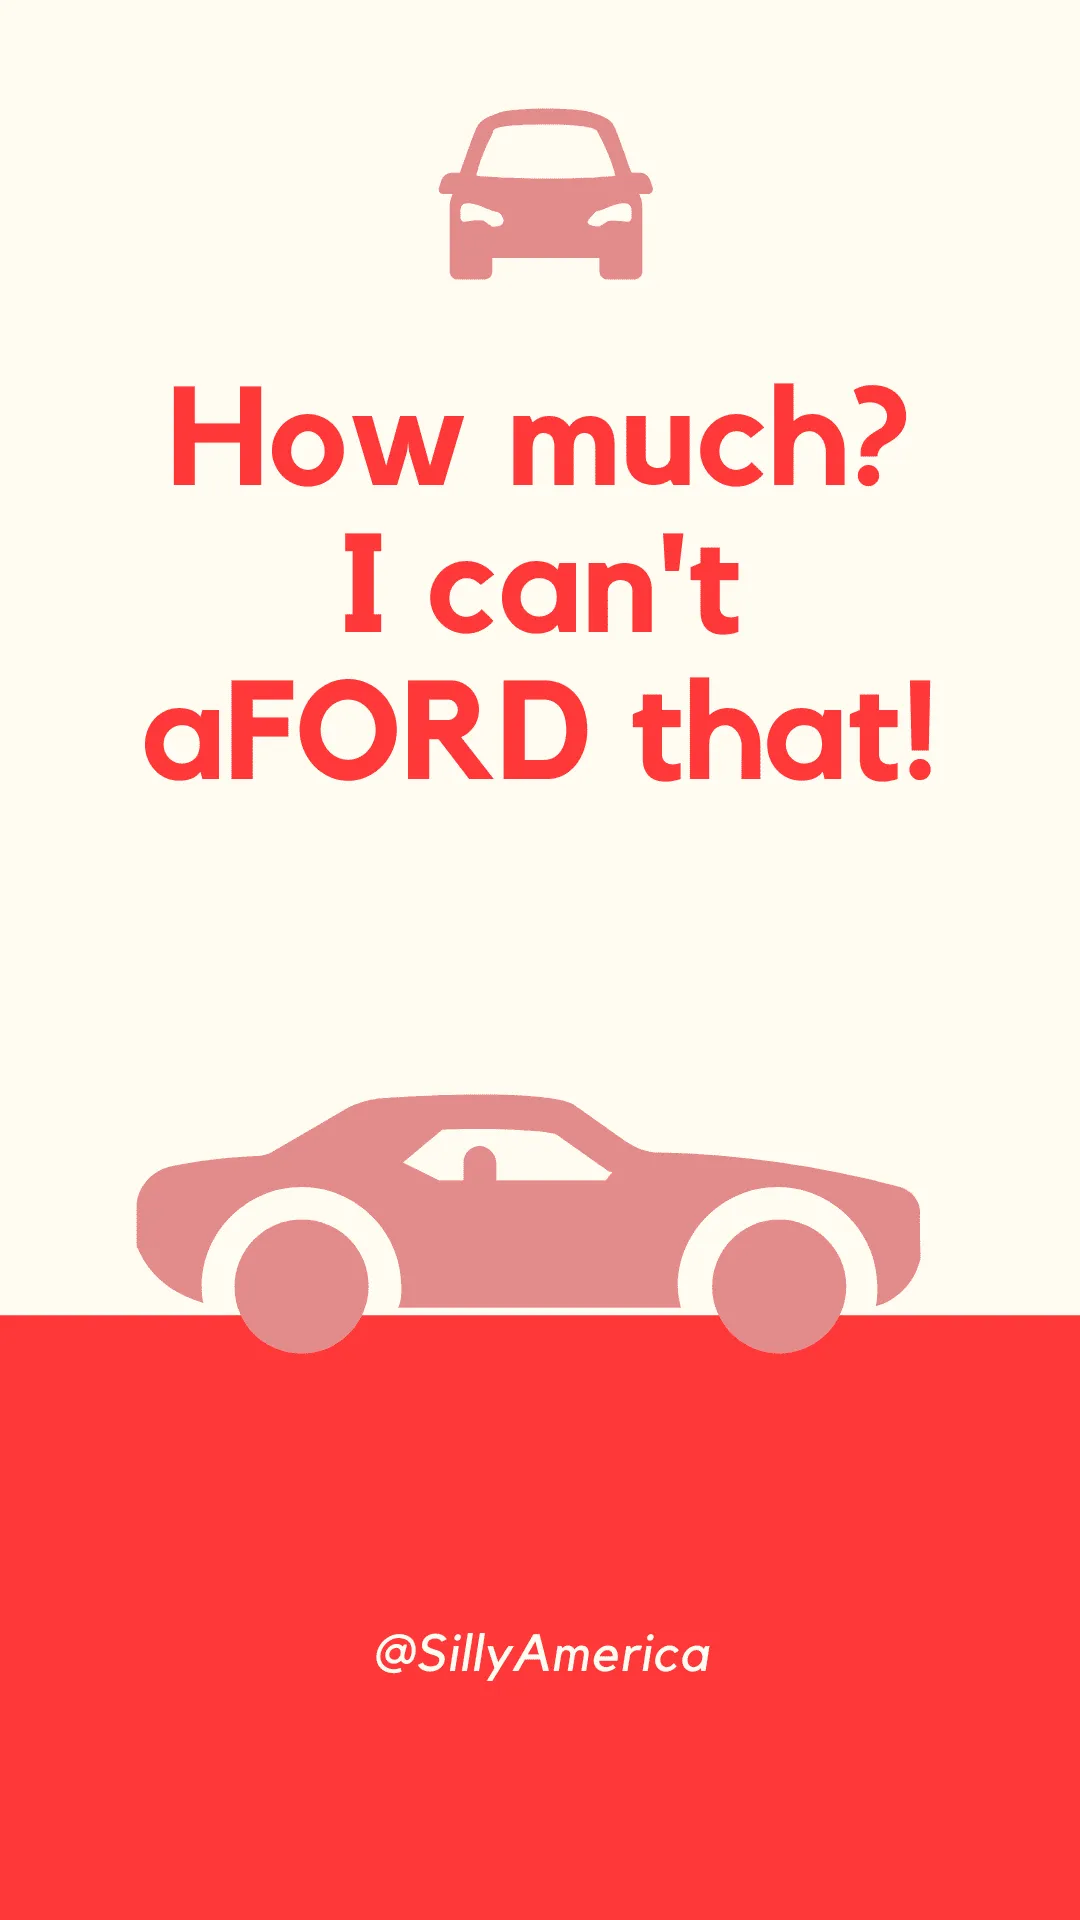 How much? I can't aFORD that! - Car Puns to fuel your road trip content!